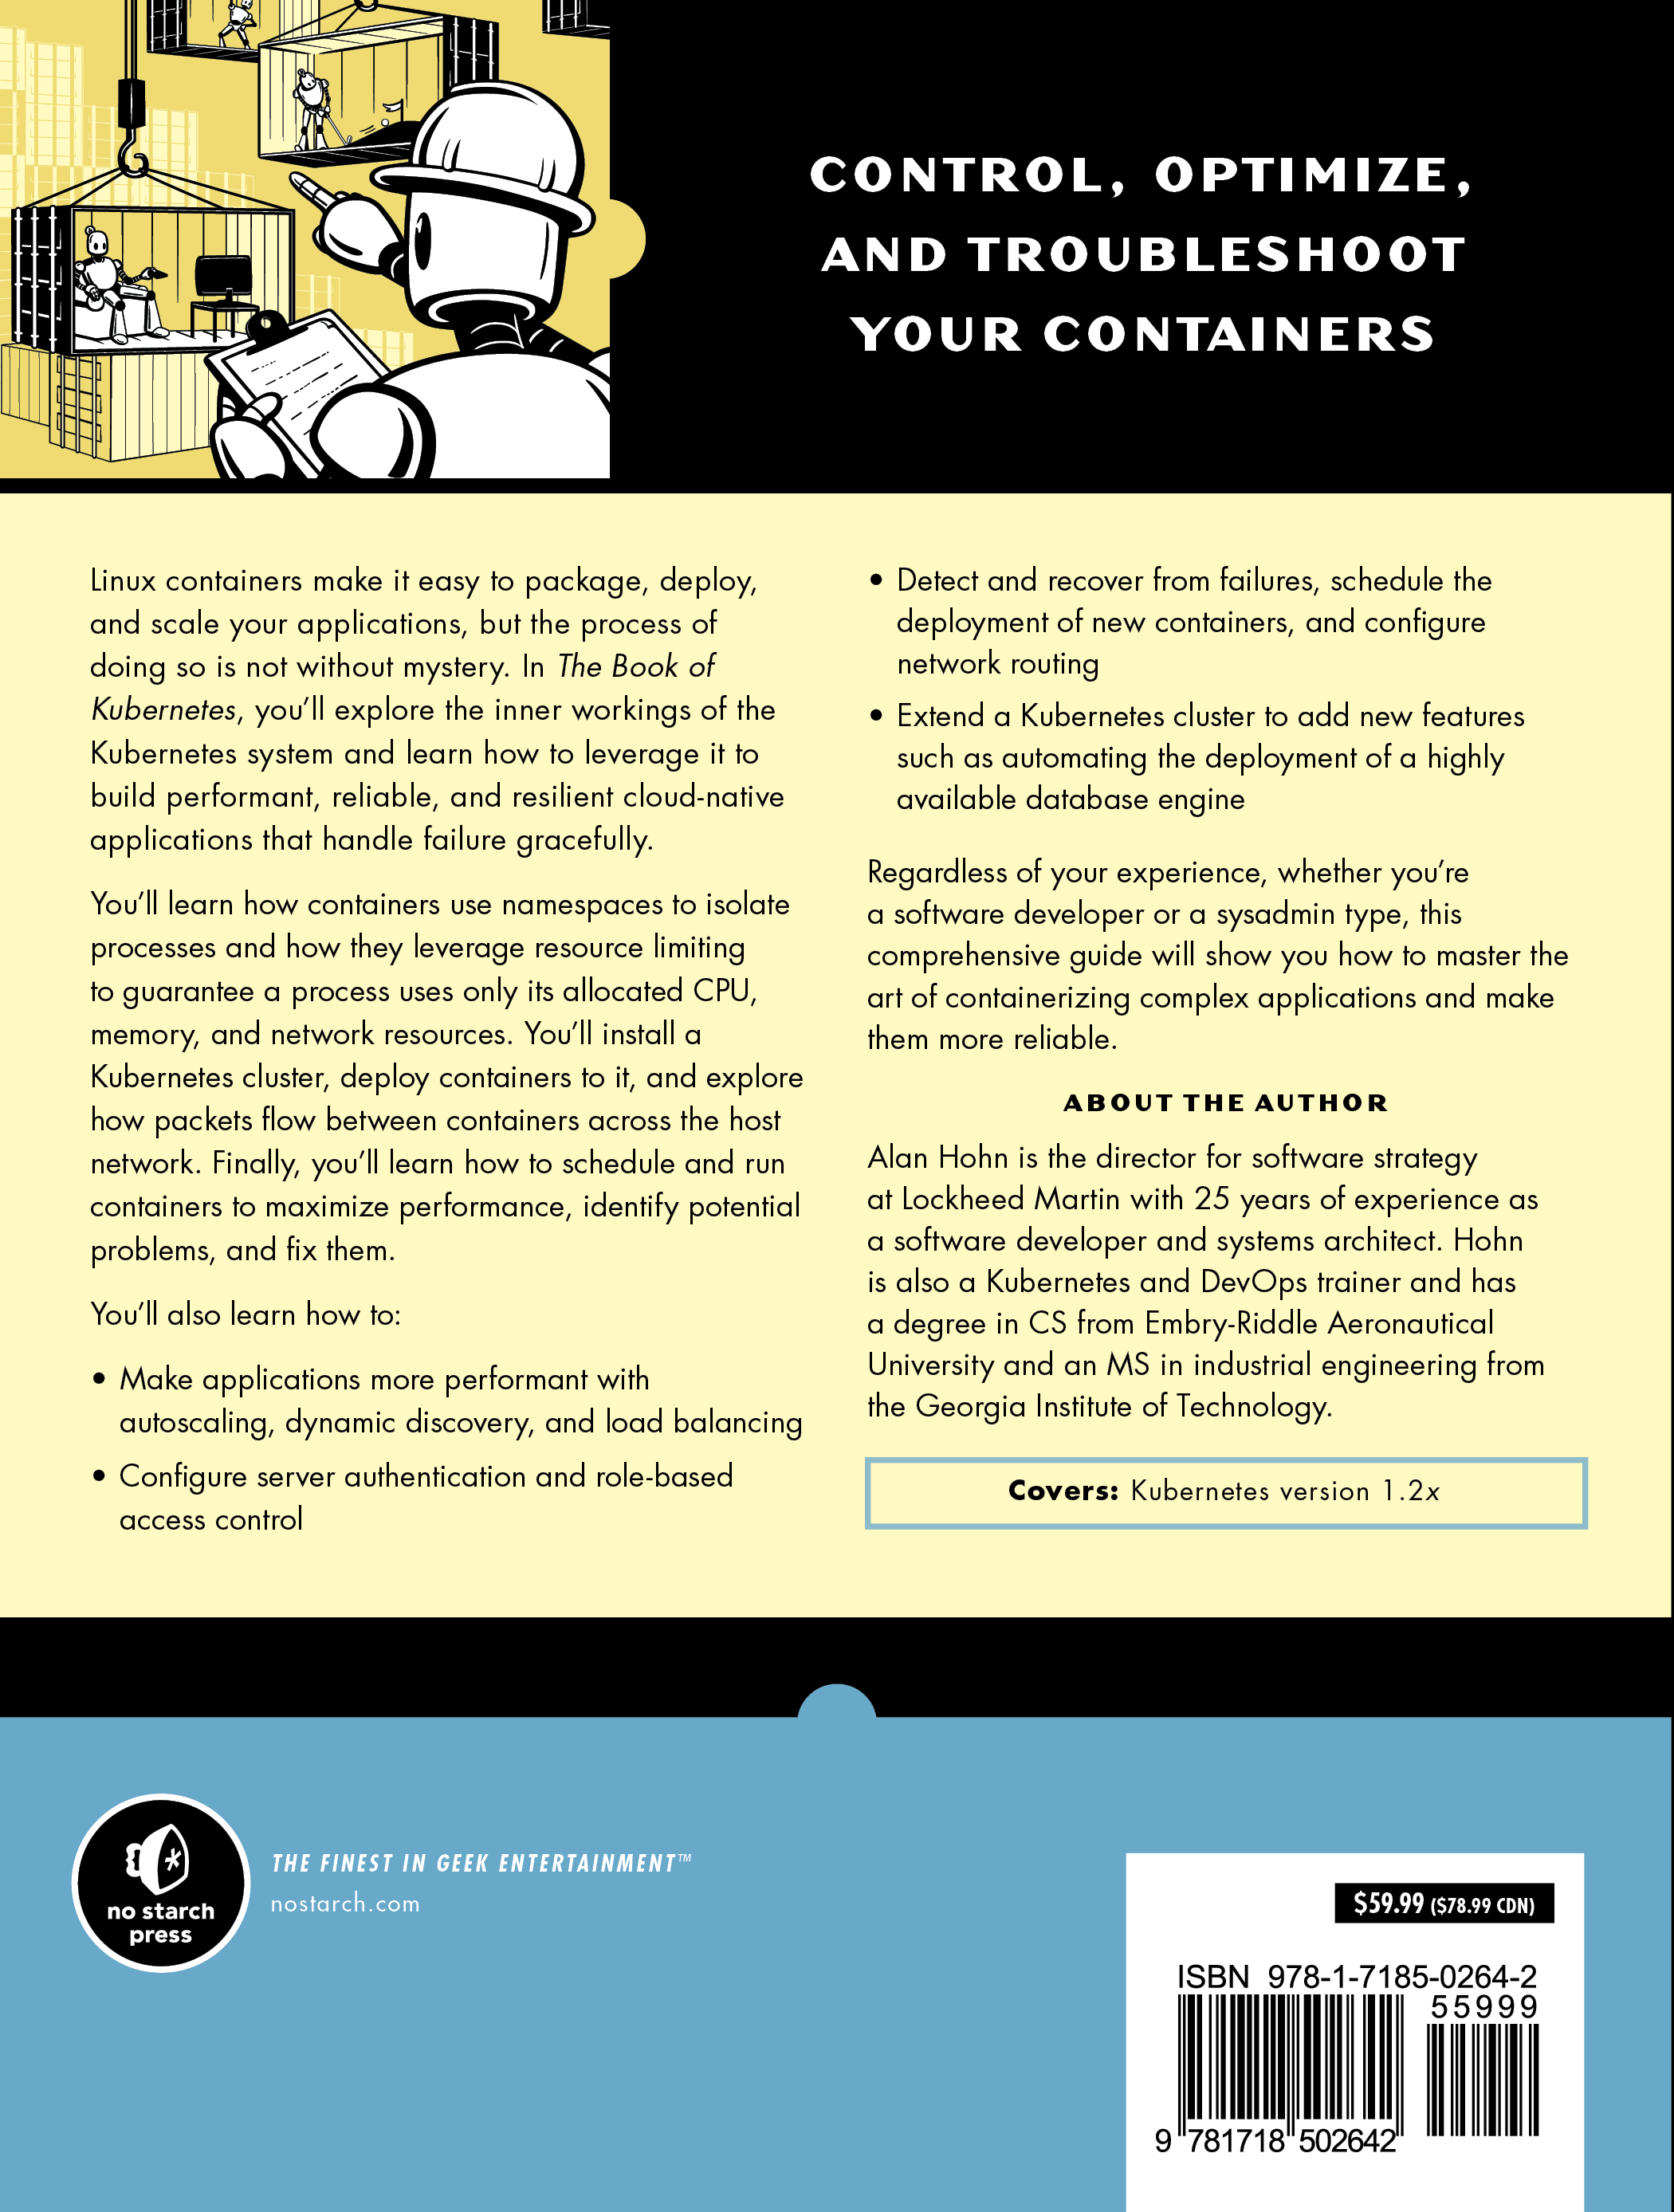 The Book of Kubernetes back cover